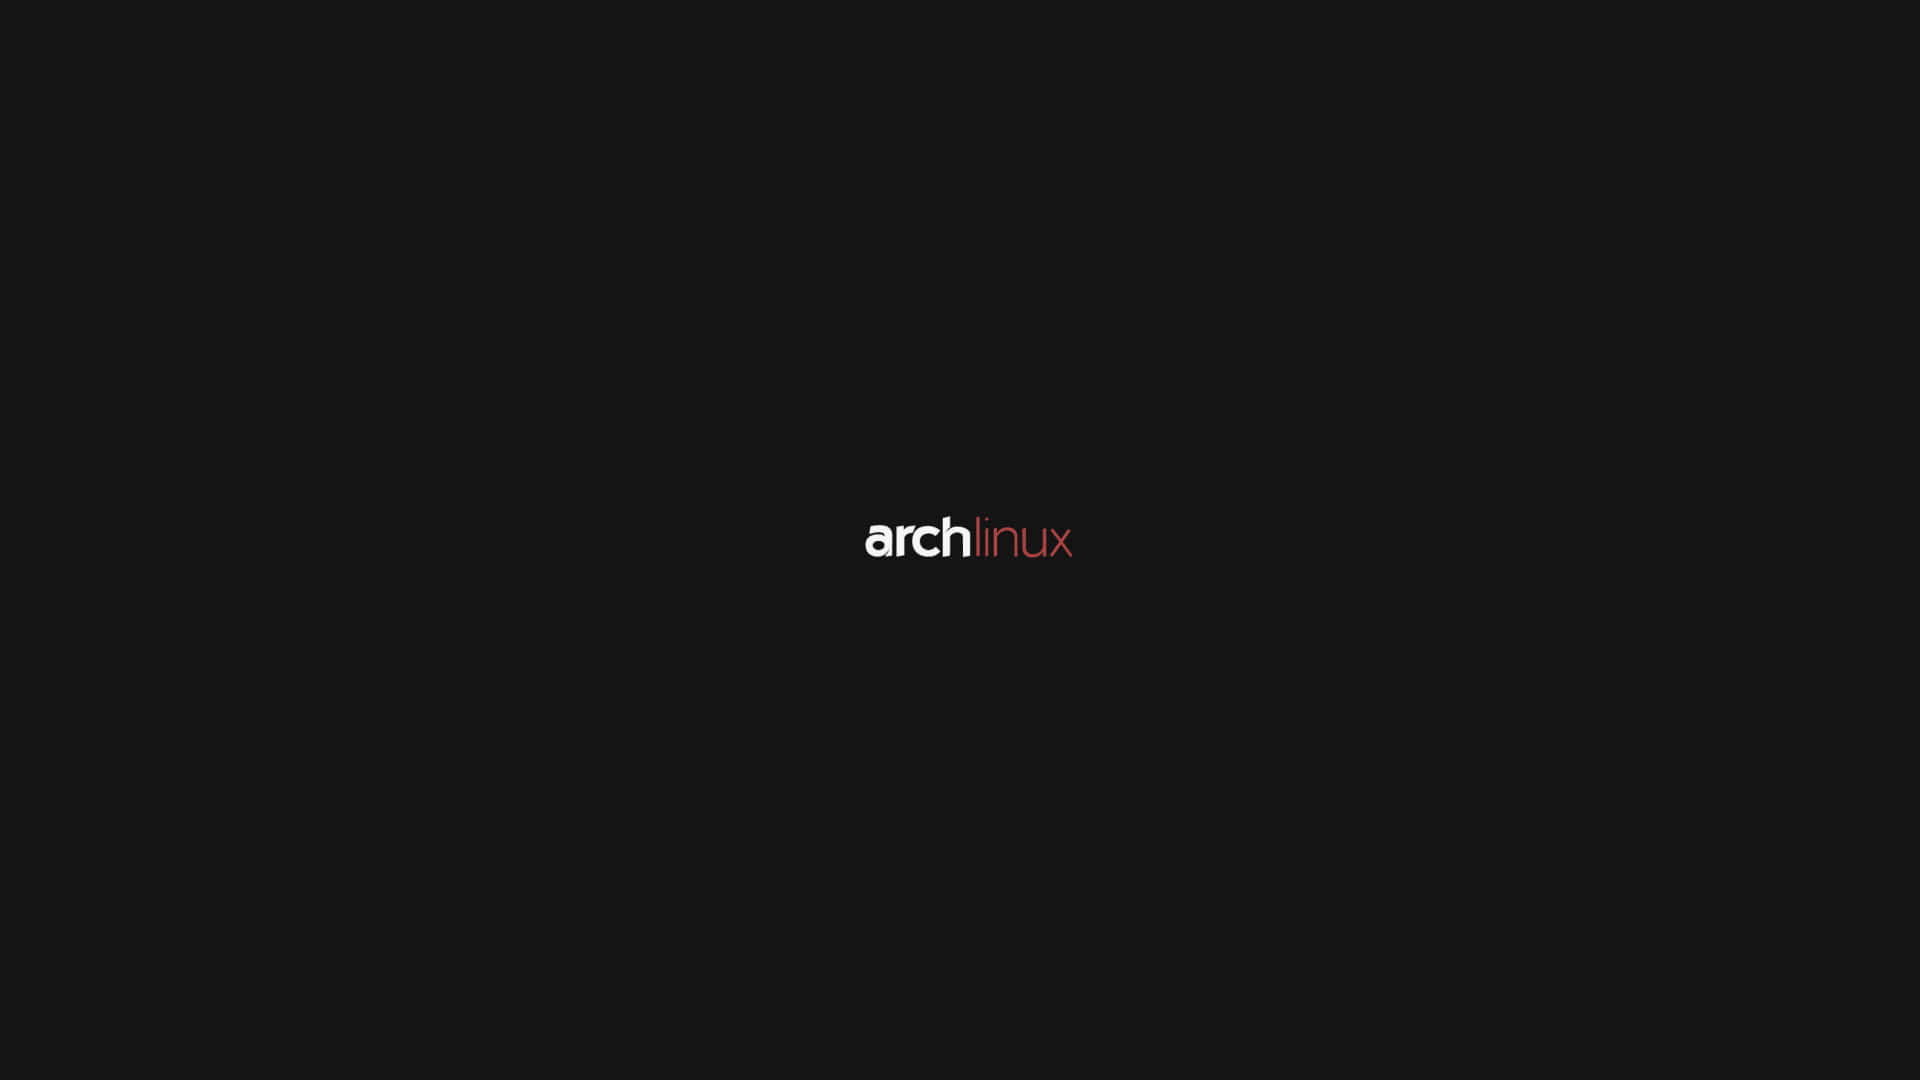 Arch Linux Wallpaper in High Resolution Wallpaper